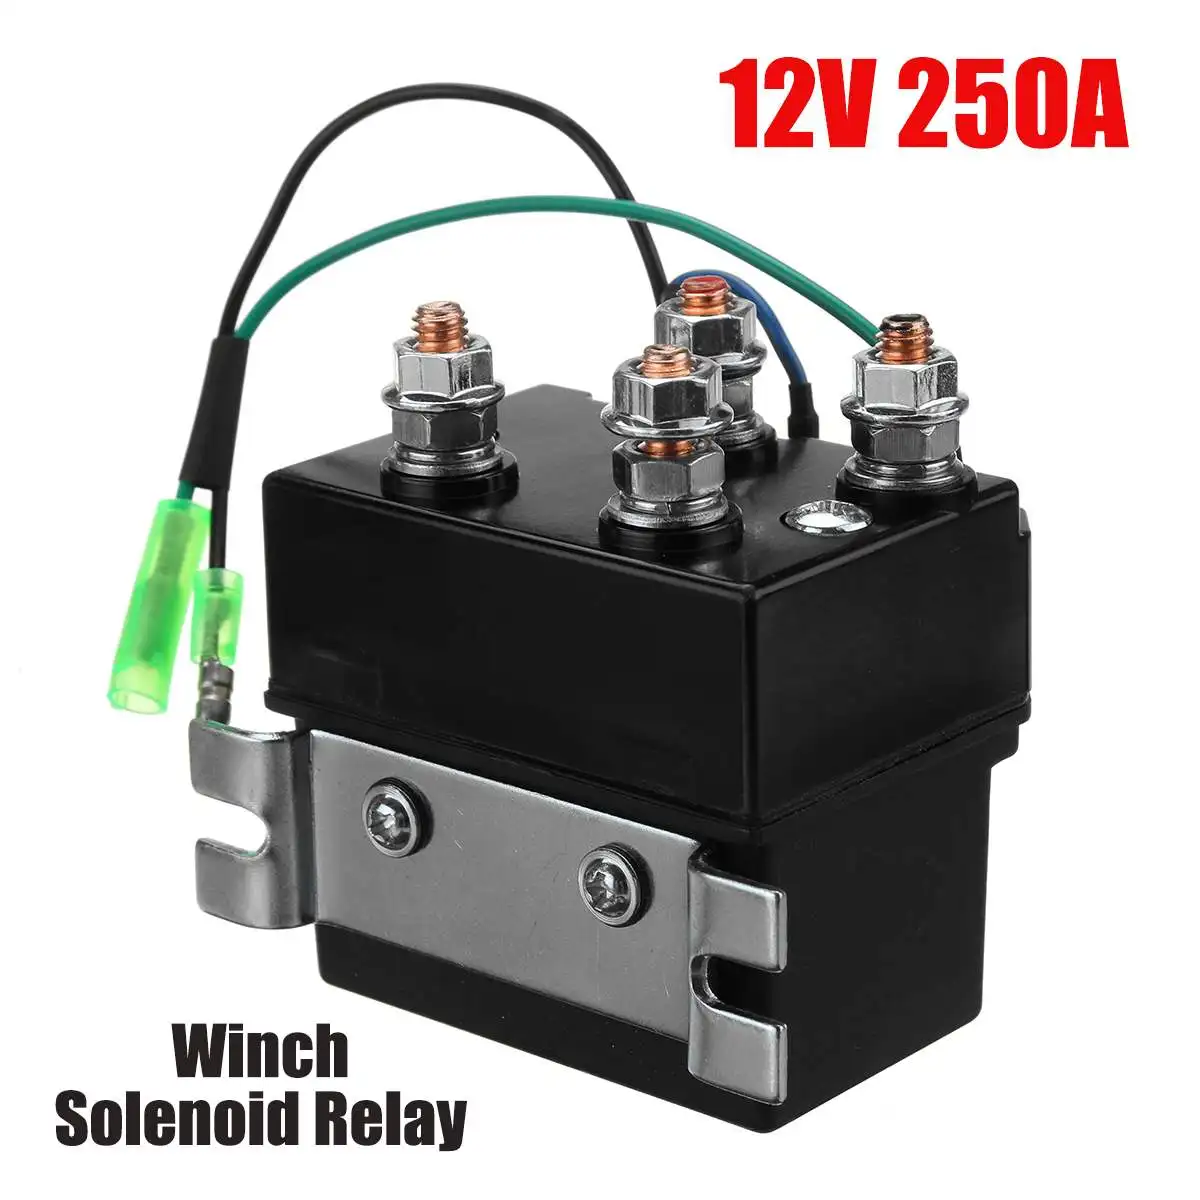 12V 250A Winch Solenoid Relay Contactor ISSYZONE Off-road Winch Rocker Thumb Switch with 6 Protecting caps for ATV UTV 2000-5000lbs Winch 